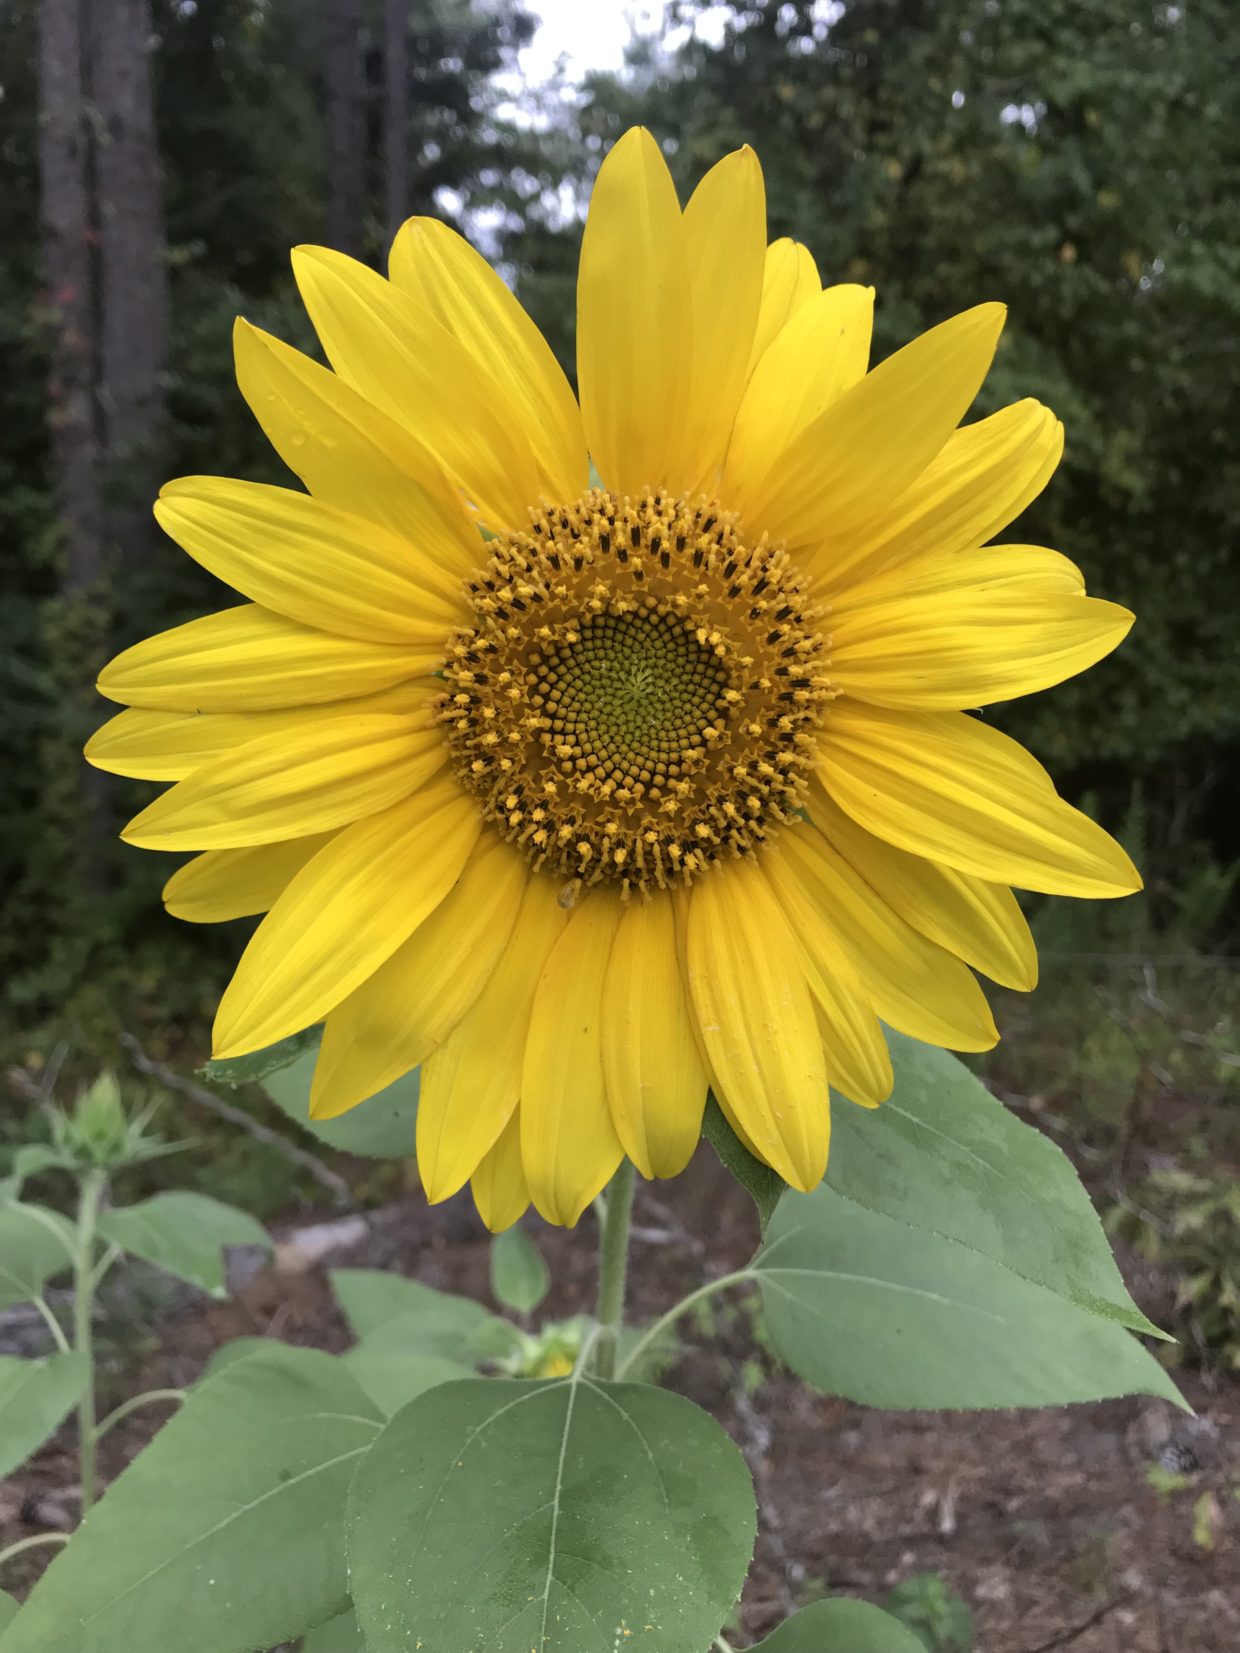 Close up of a sunflower communicating happiness